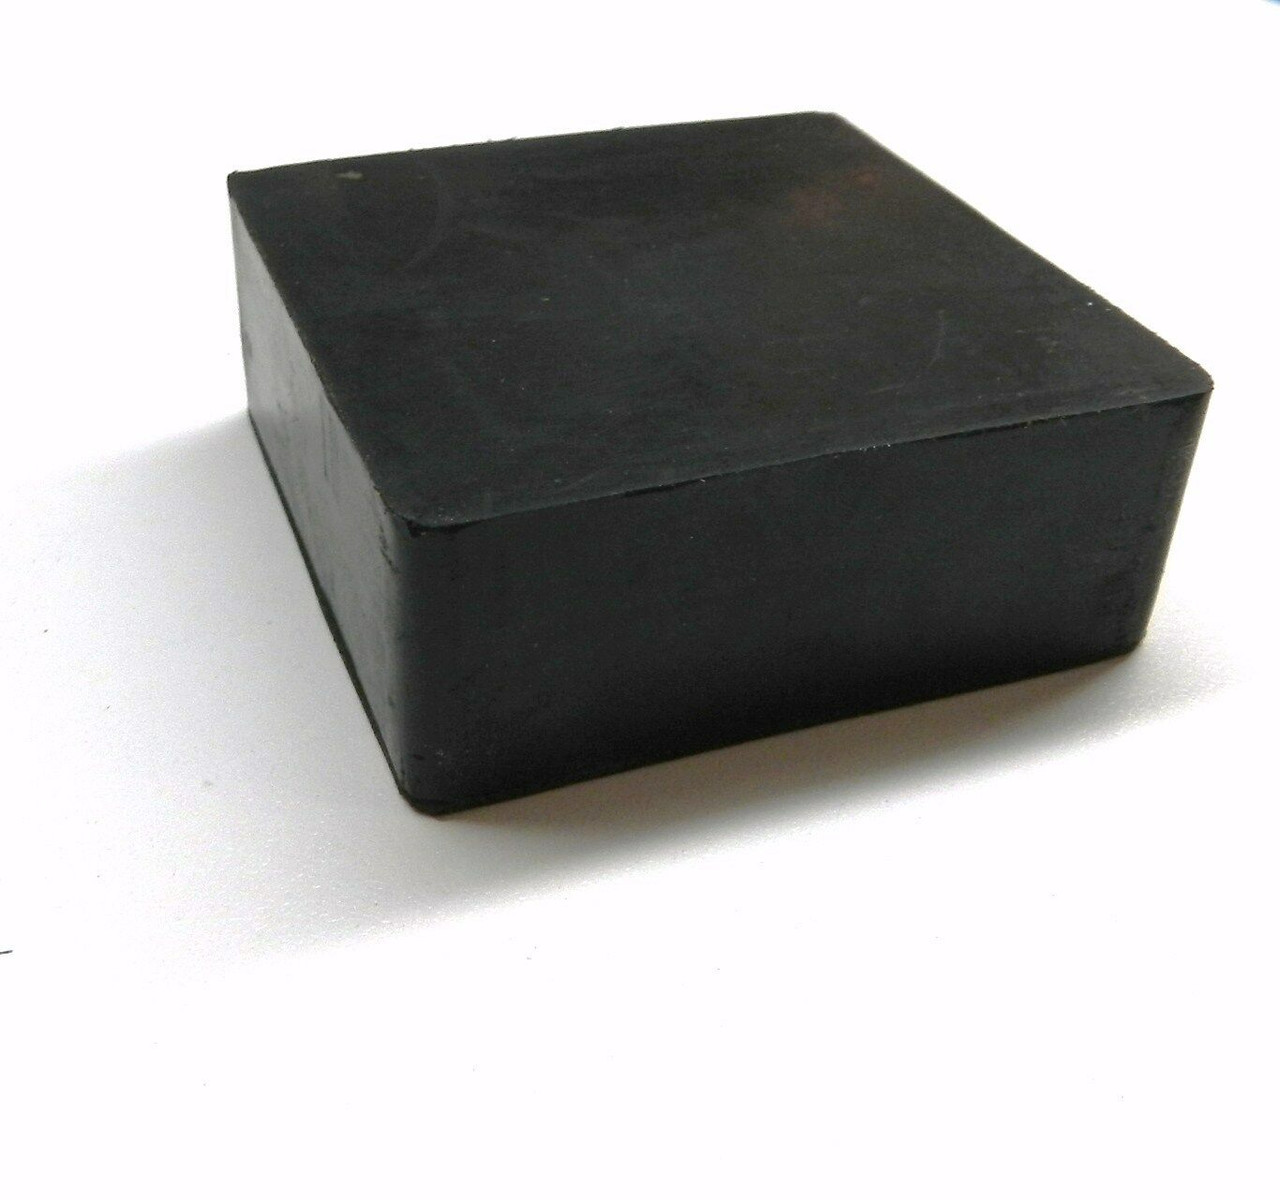 Jeweler's Solid Rubber Bench Block - 2-1/2 x 2-1/2